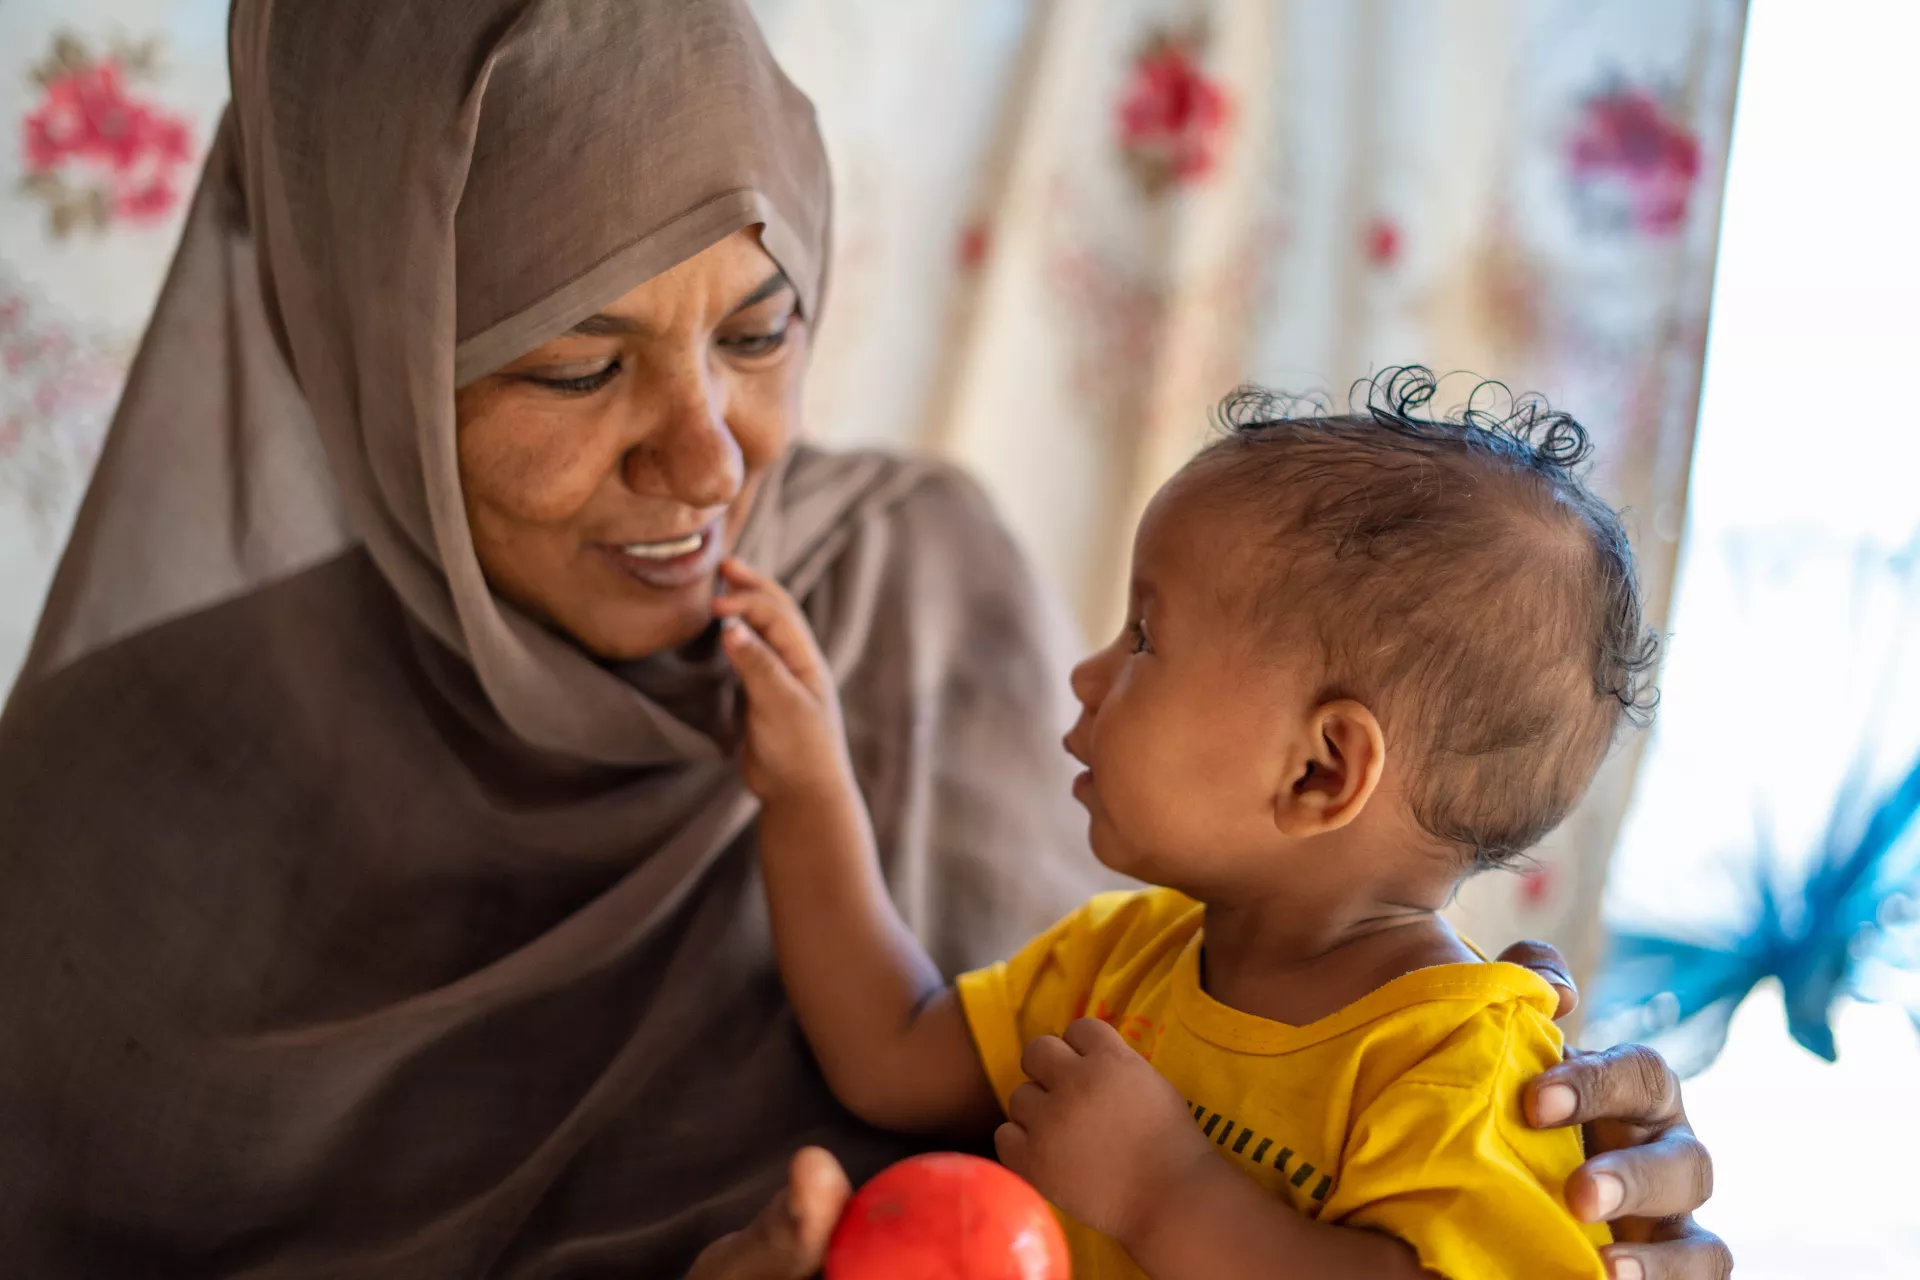 On 22 February 2023, Sabna Mohamed plays with her 9-month-old daughter, Fatuma, at their home in Wager village, North Delta locality, Kassala State, Sudan.